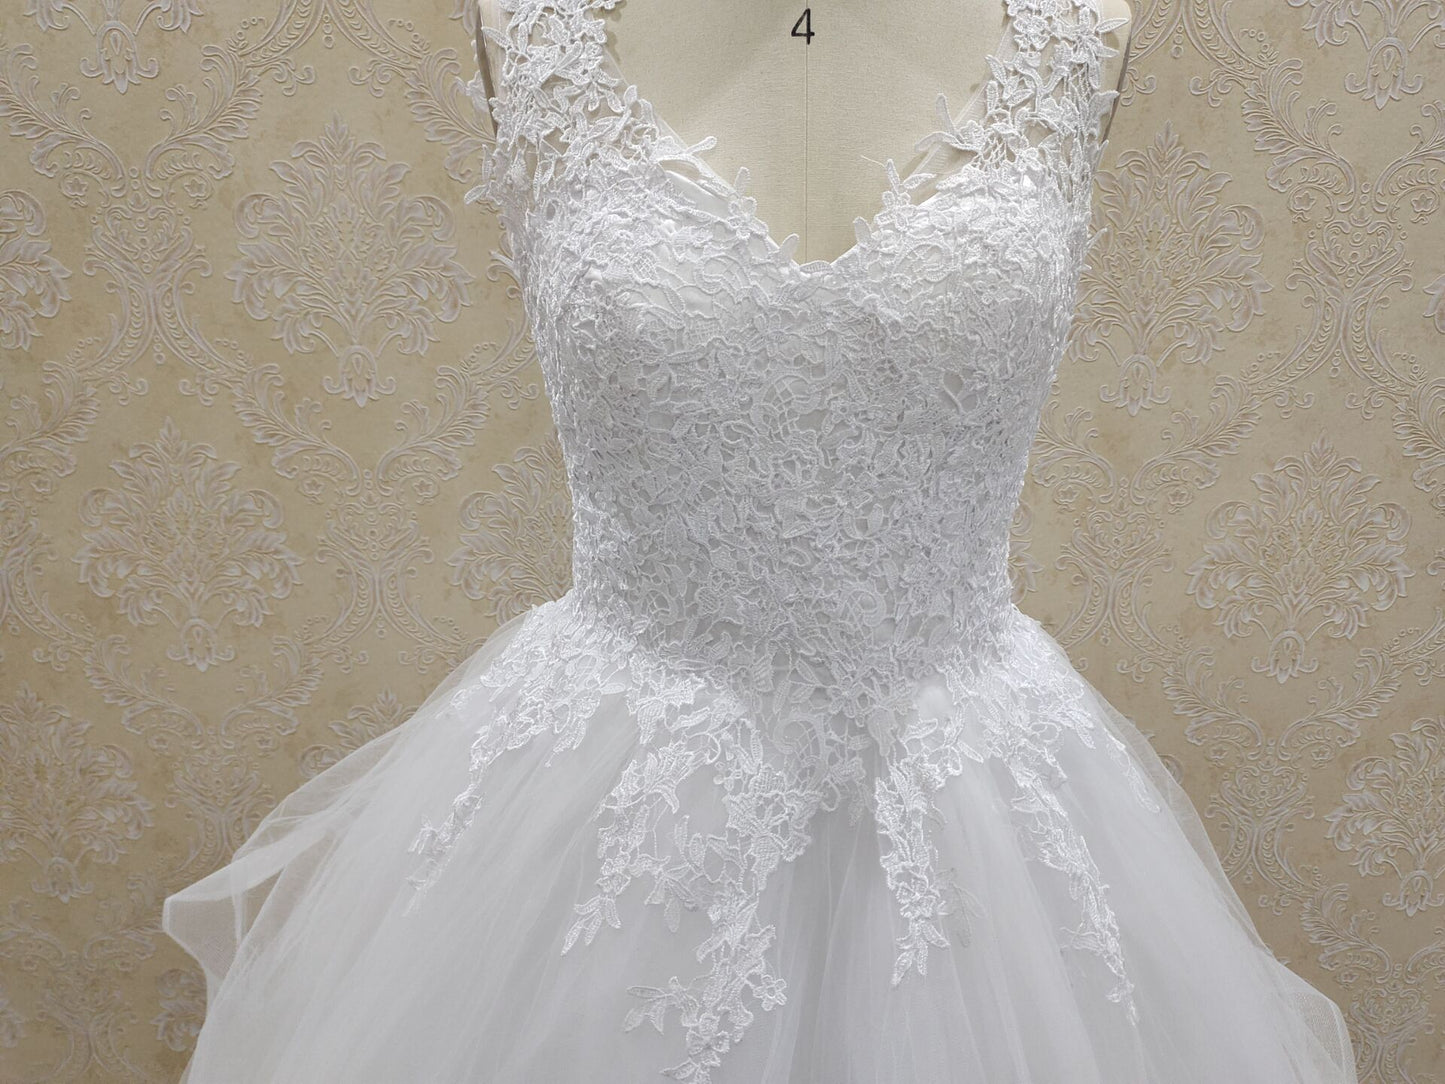 V-neck Princess Ball Gown Wedding Dress With Tiered Tulle Skirt White Bride Dress